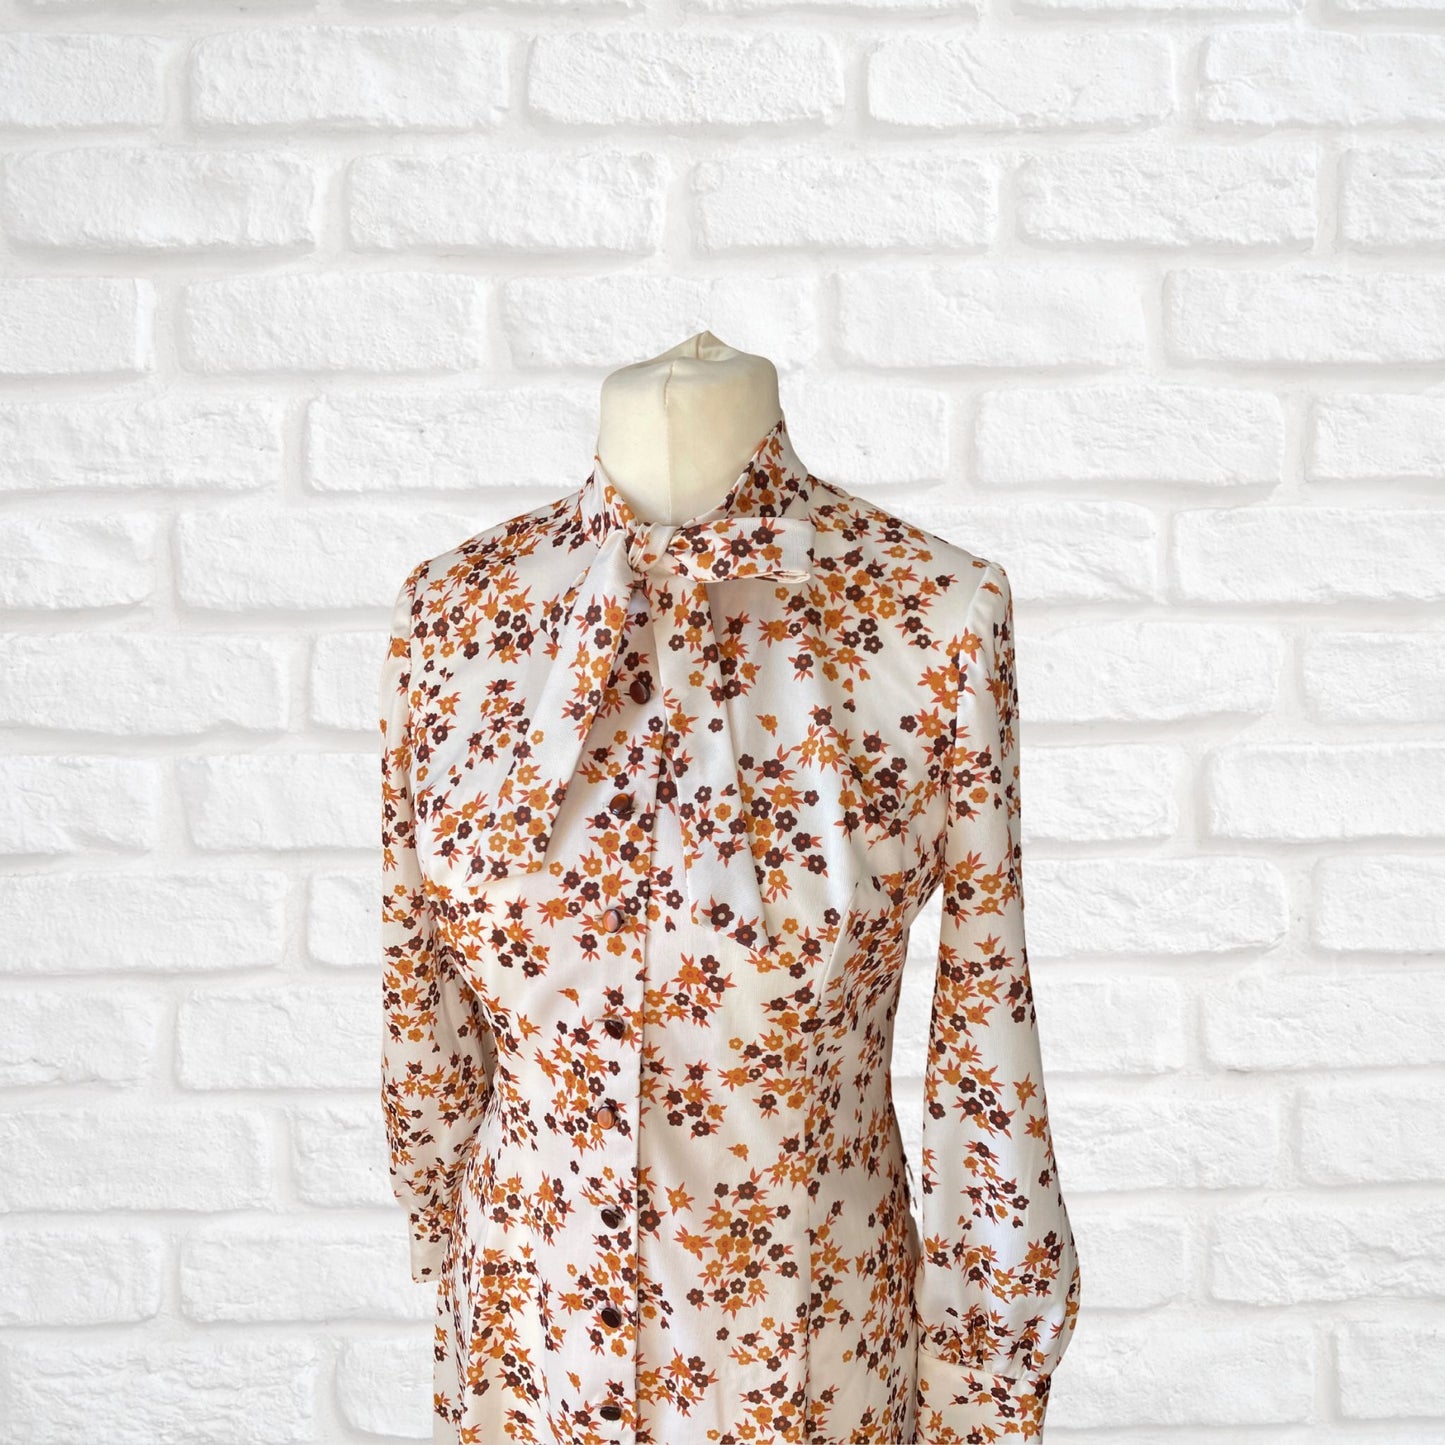 Vintage Cream and Brown Floral Print Dress with Tie Neck. Approx UK size 12-14